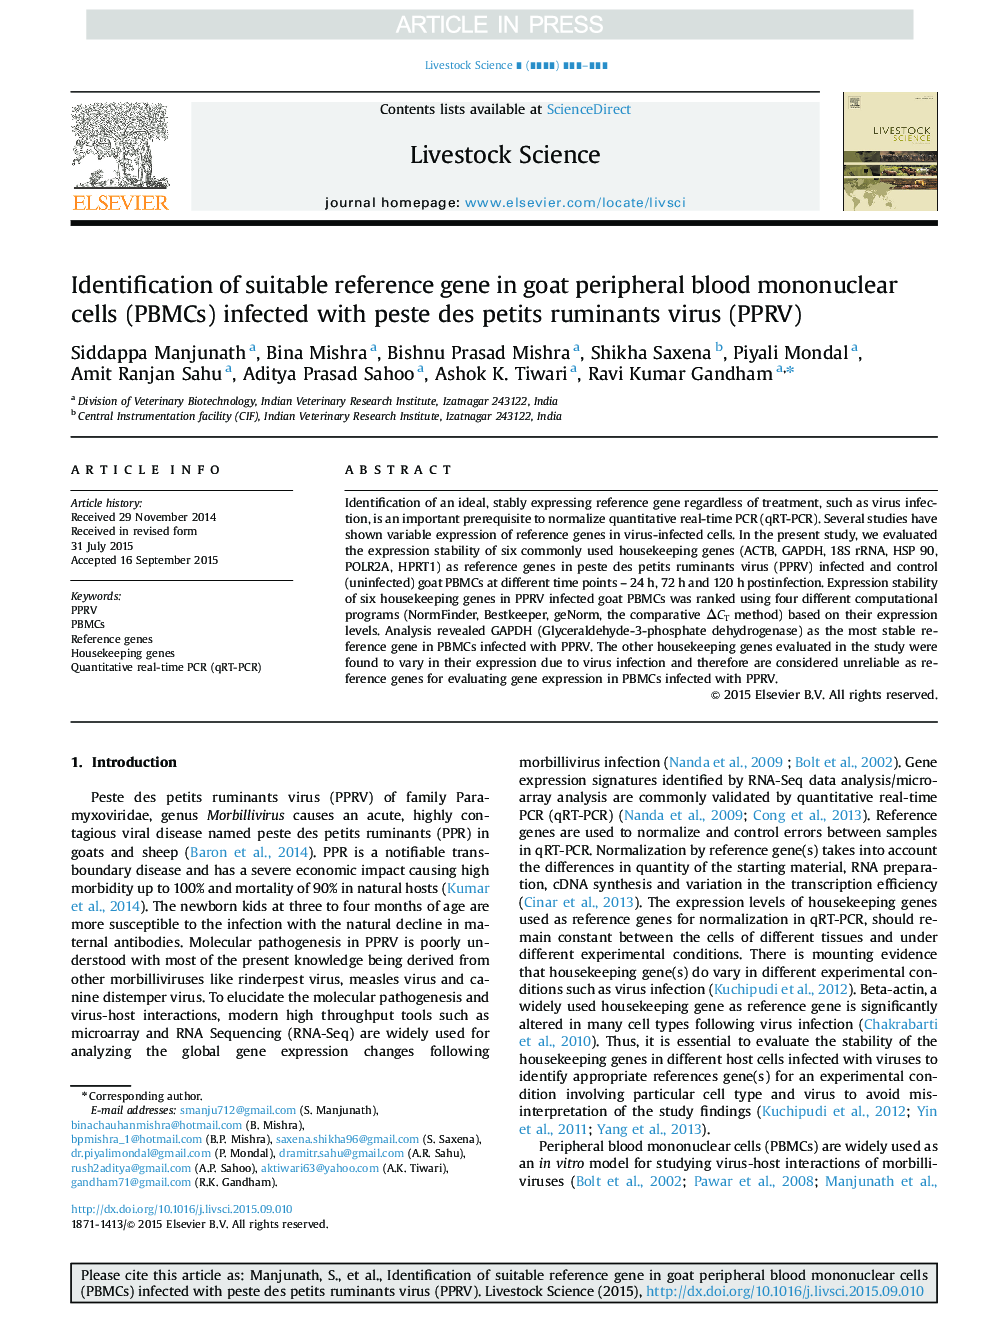 Identification of suitable reference gene in goat peripheral blood mononuclear cells (PBMCs) infected with peste des petits ruminants virus (PPRV)